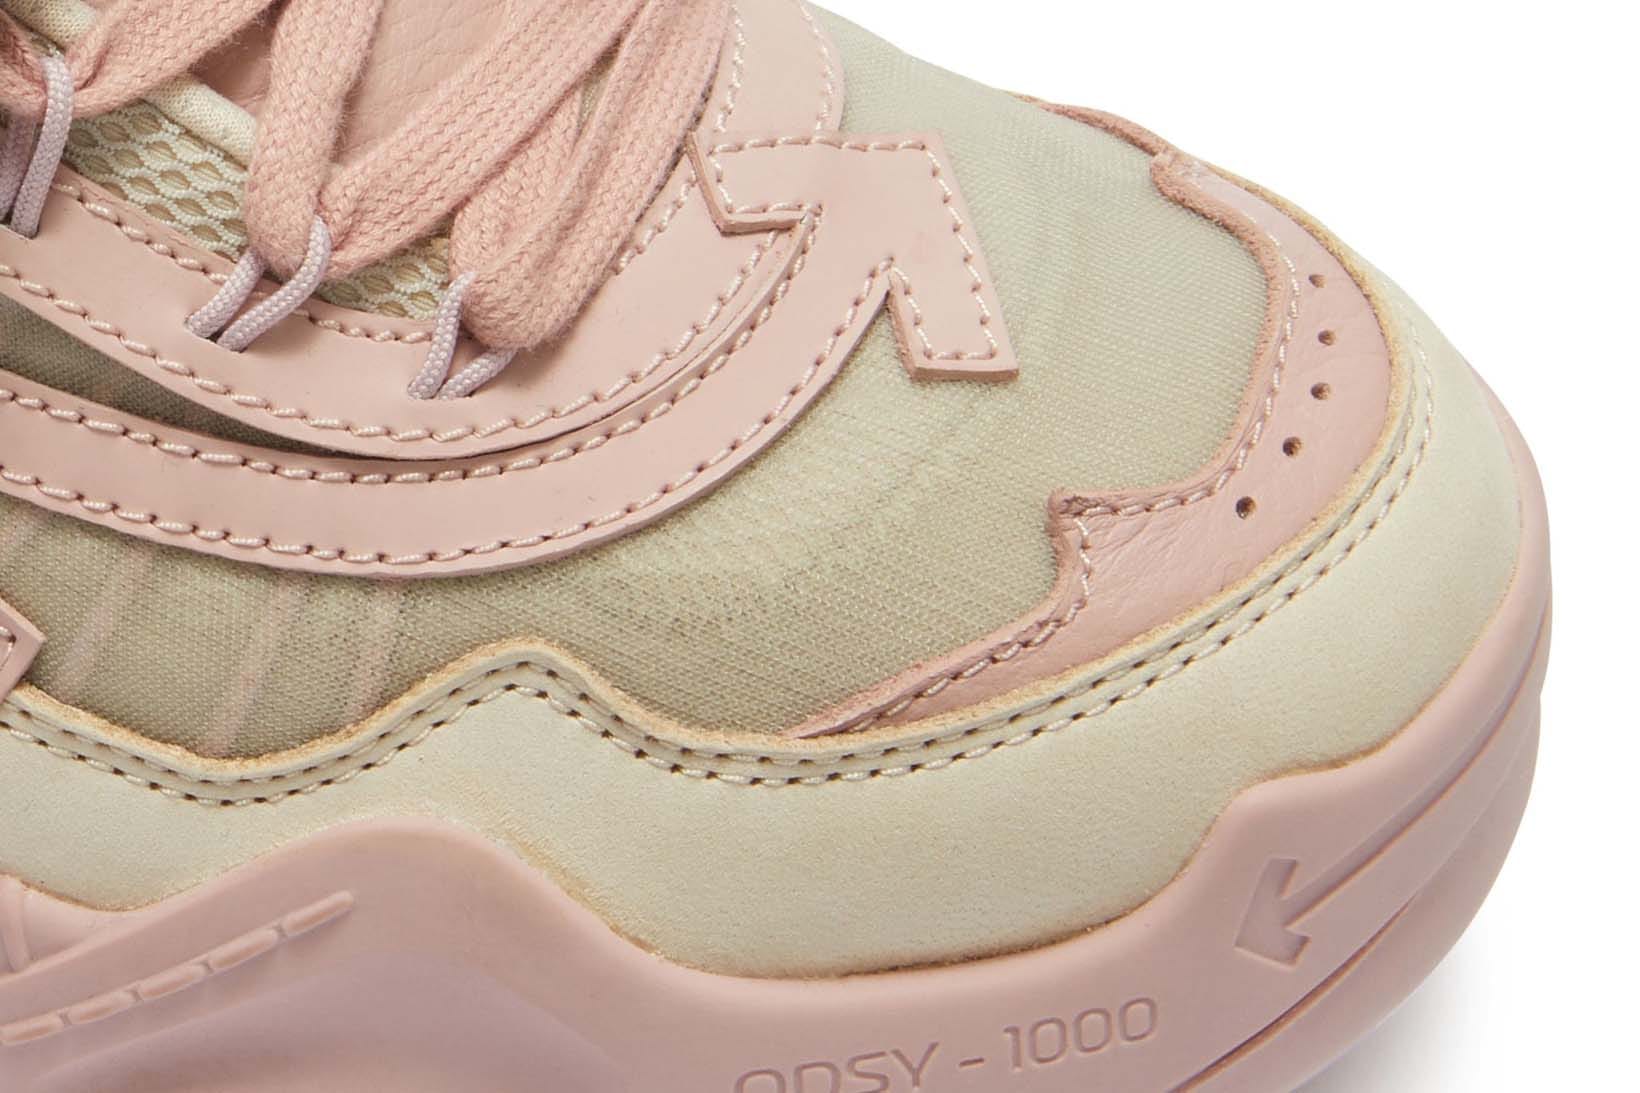 Off-White™ Odsy-1000 Sneaker Gets Pink Colorway | HYPEBAE